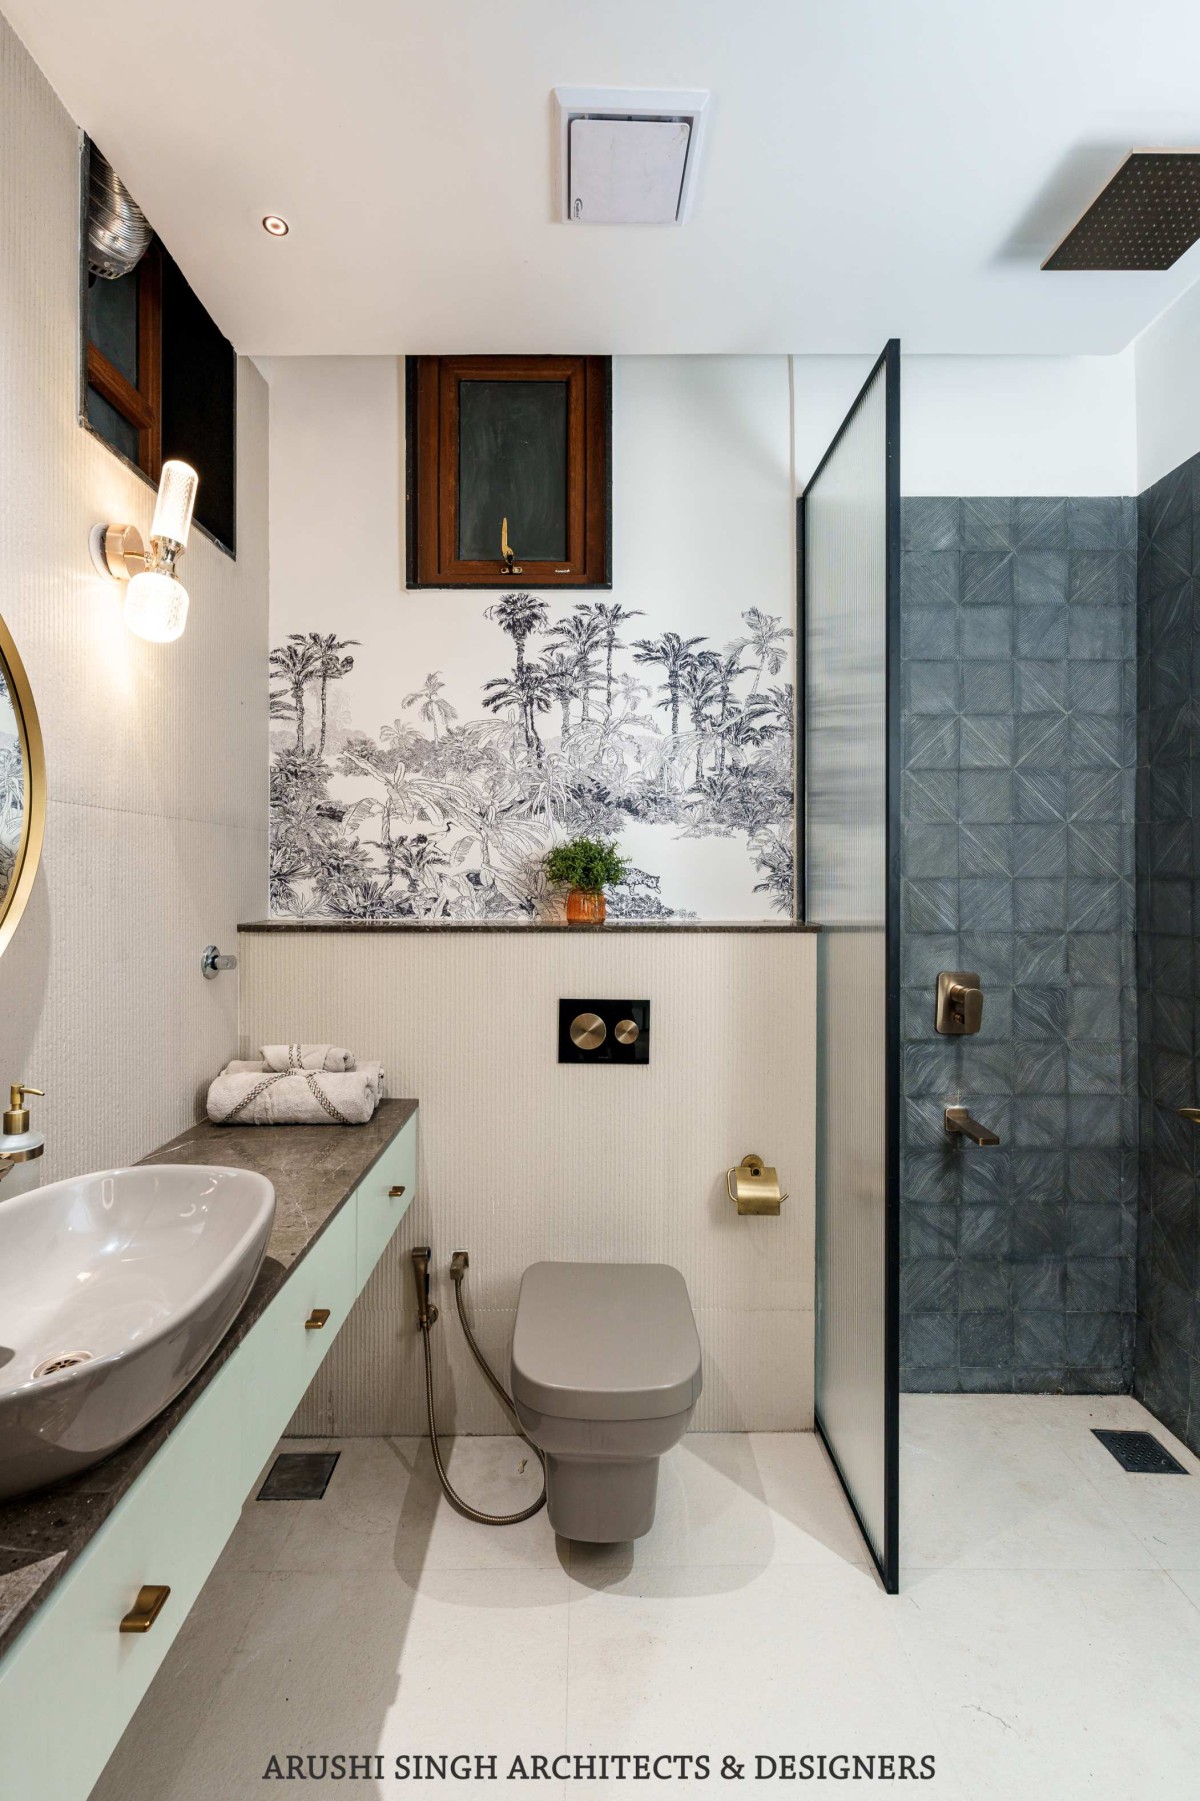 Bathroom of The Narayan House by Arushi Singh Architects & Designers